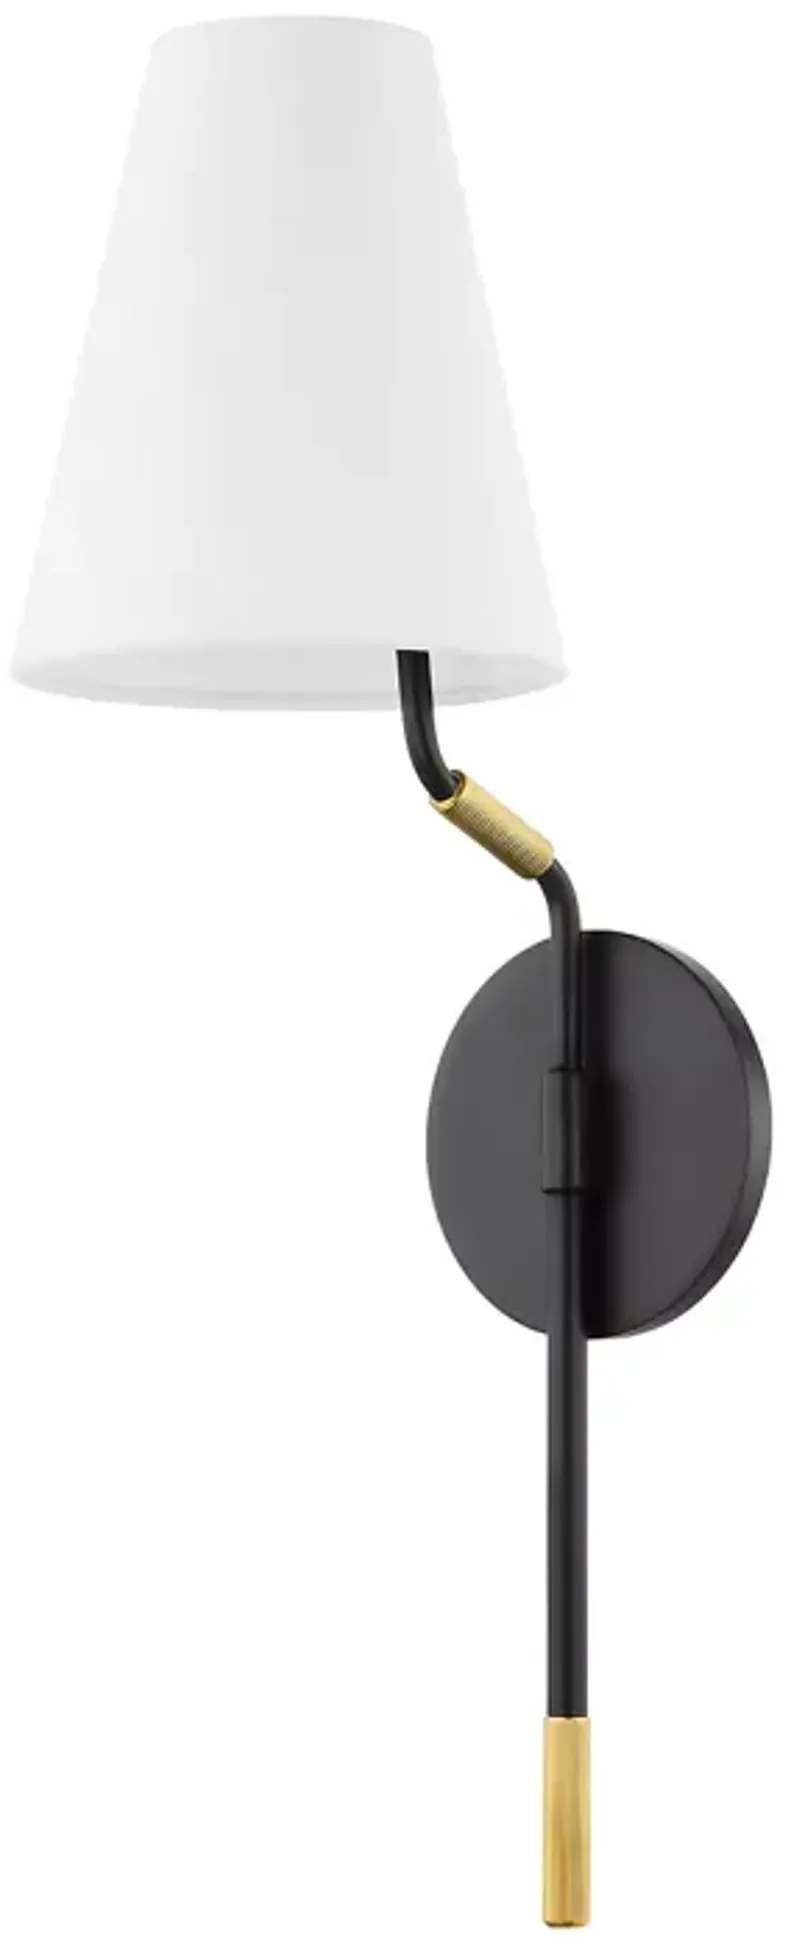 Bloomingdale's Stanwyck One Light Wall Sconce 